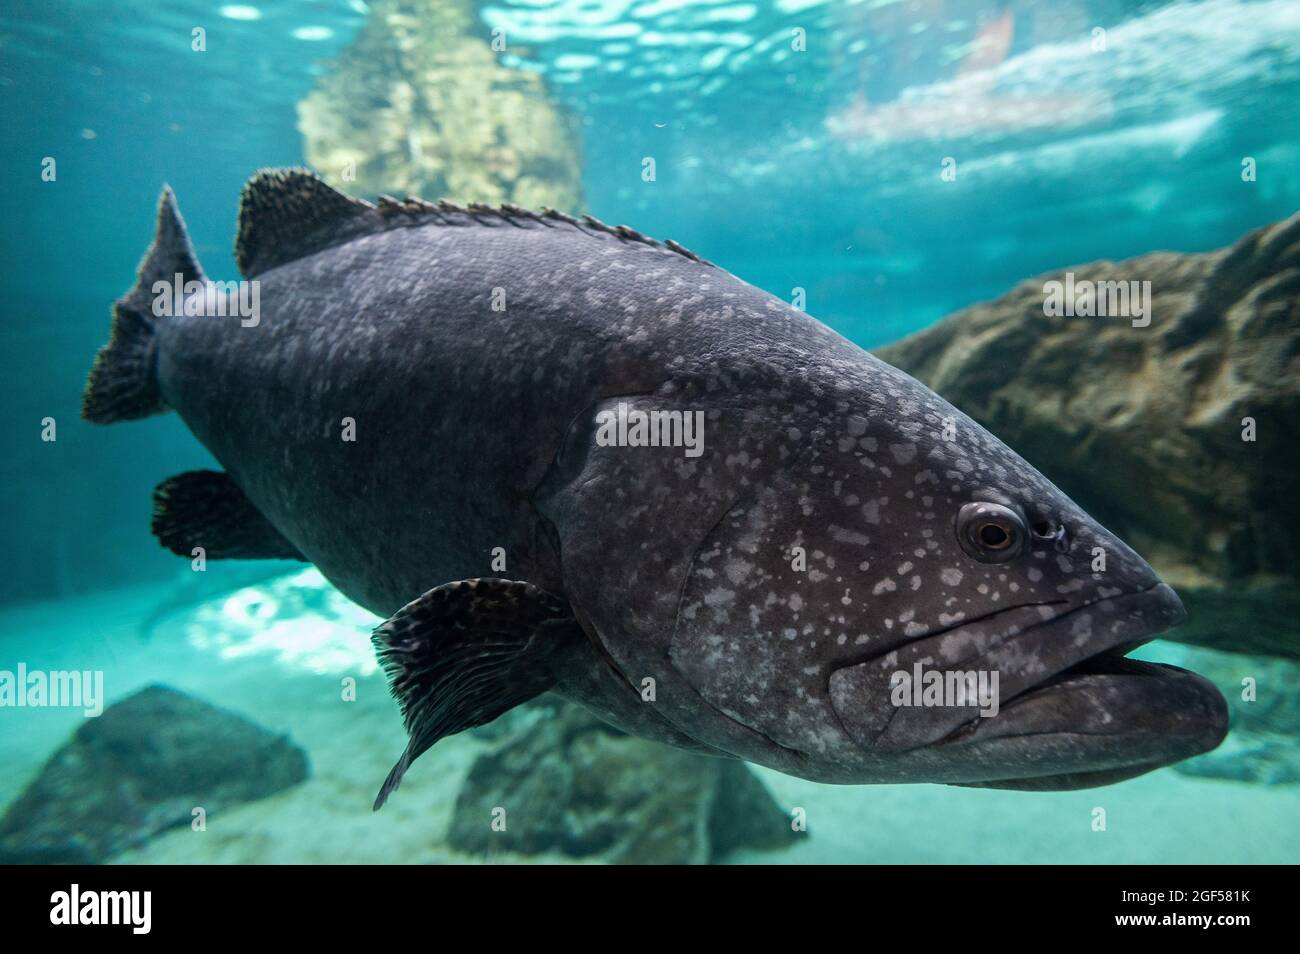 Madrid, Spain. 23rd Aug, 2021. A giant grouper (Epinephelus lanceolatus), also known as the Queensland grouper, brindle grouper or mottled-brown sea bass, swimming in its enclosure during a summer day with high temperatures in the Zoo Aquarium of Madrid. Credit: Marcos del Mazo/Alamy Live News Stock Photo